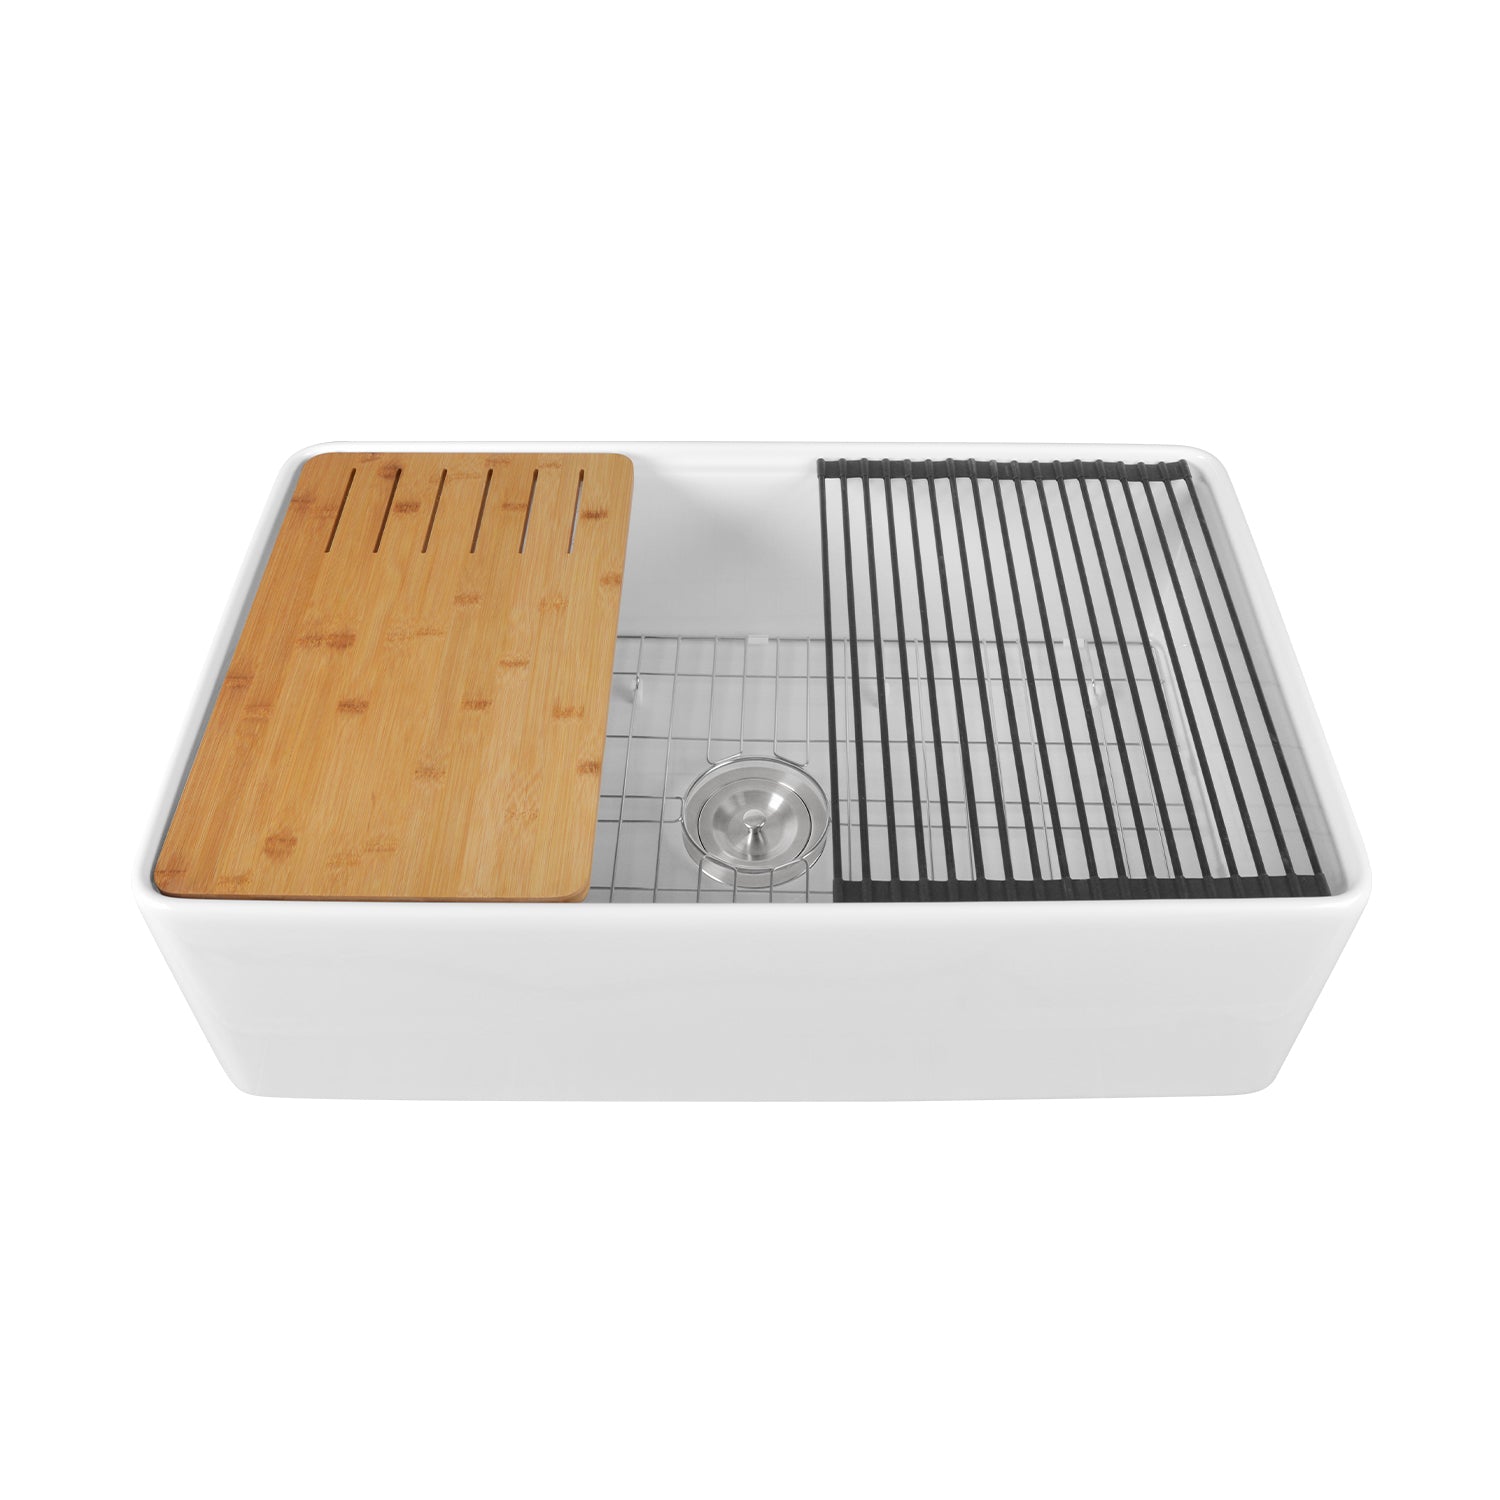 Deervalley 33 L X 20 W Single Basin Workstation Farmhouse Kitchen Sink  With Sink Grid, Cutting Board And Dish-Drying Rack & Reviews